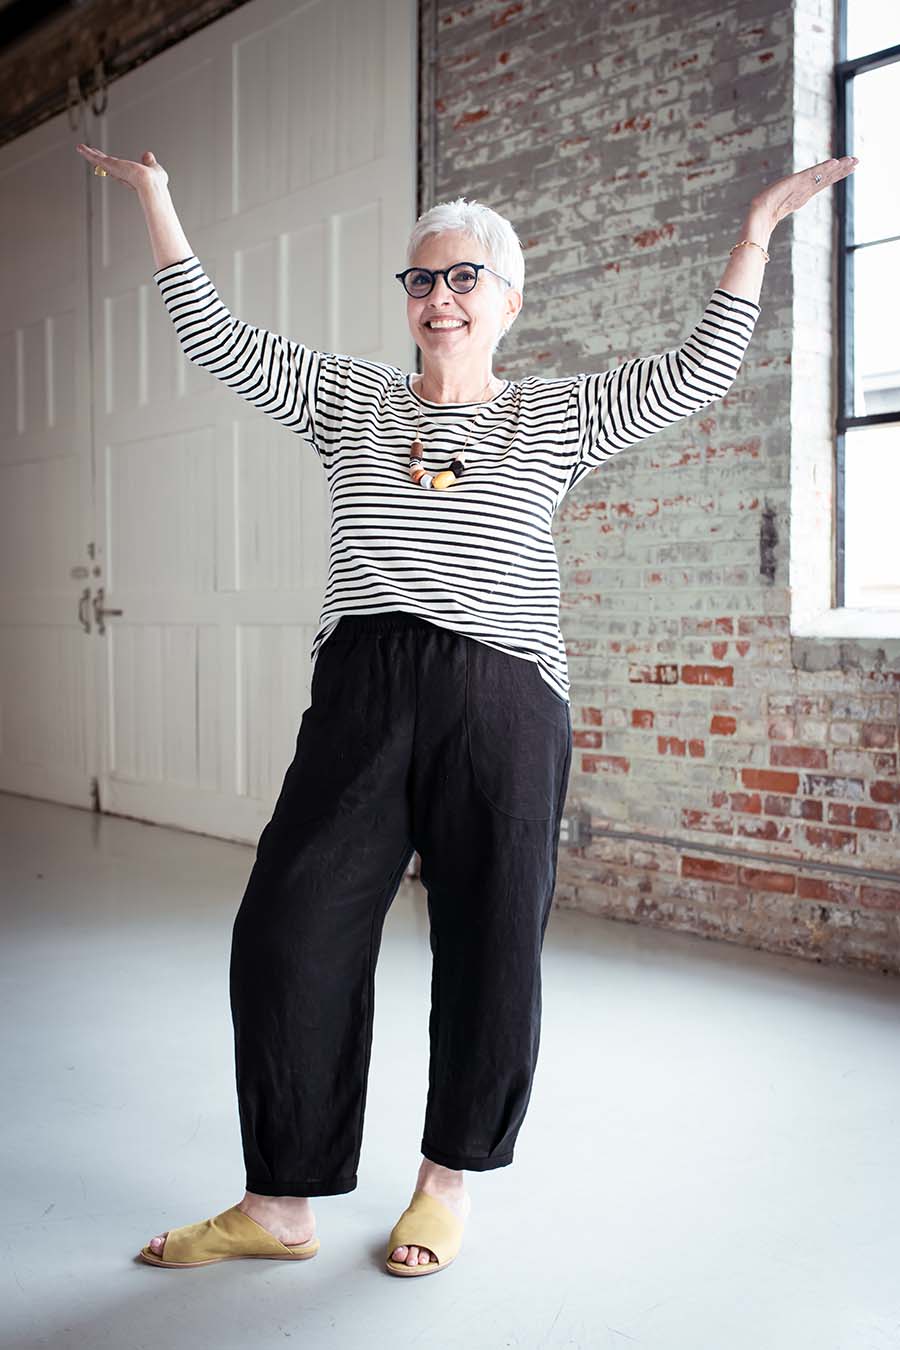 Cindy wears black chanterelle pants and a striped top